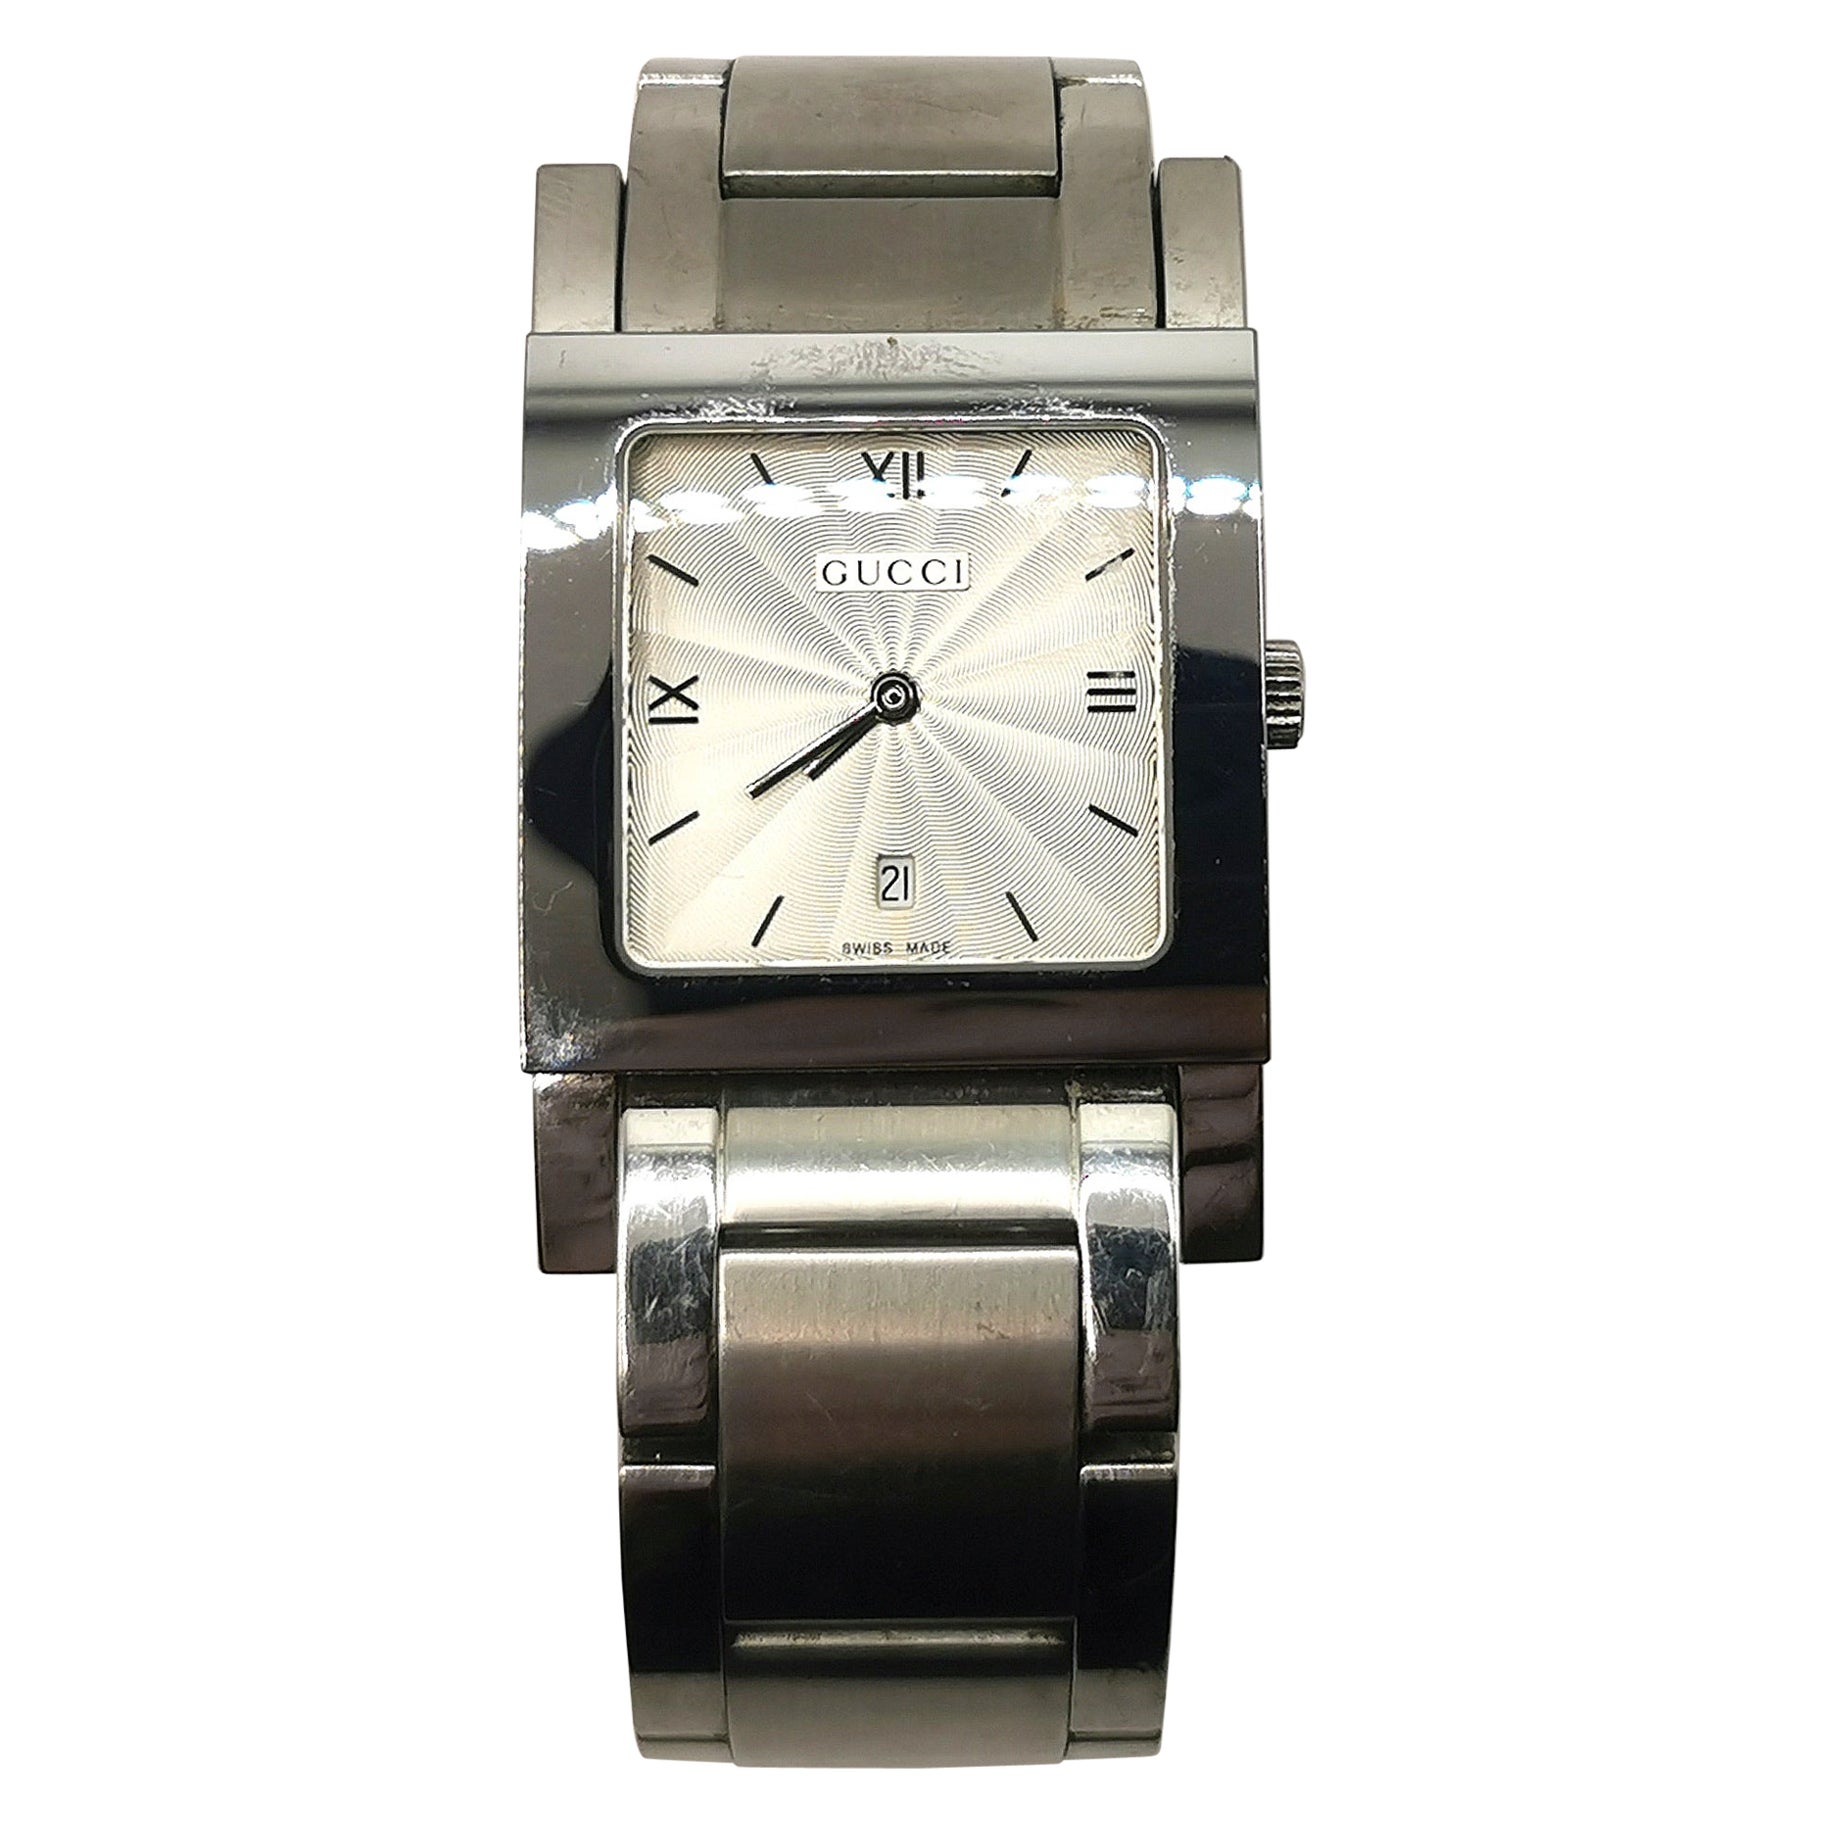 Gucci 7900M.1 stainless steel wristwatch 